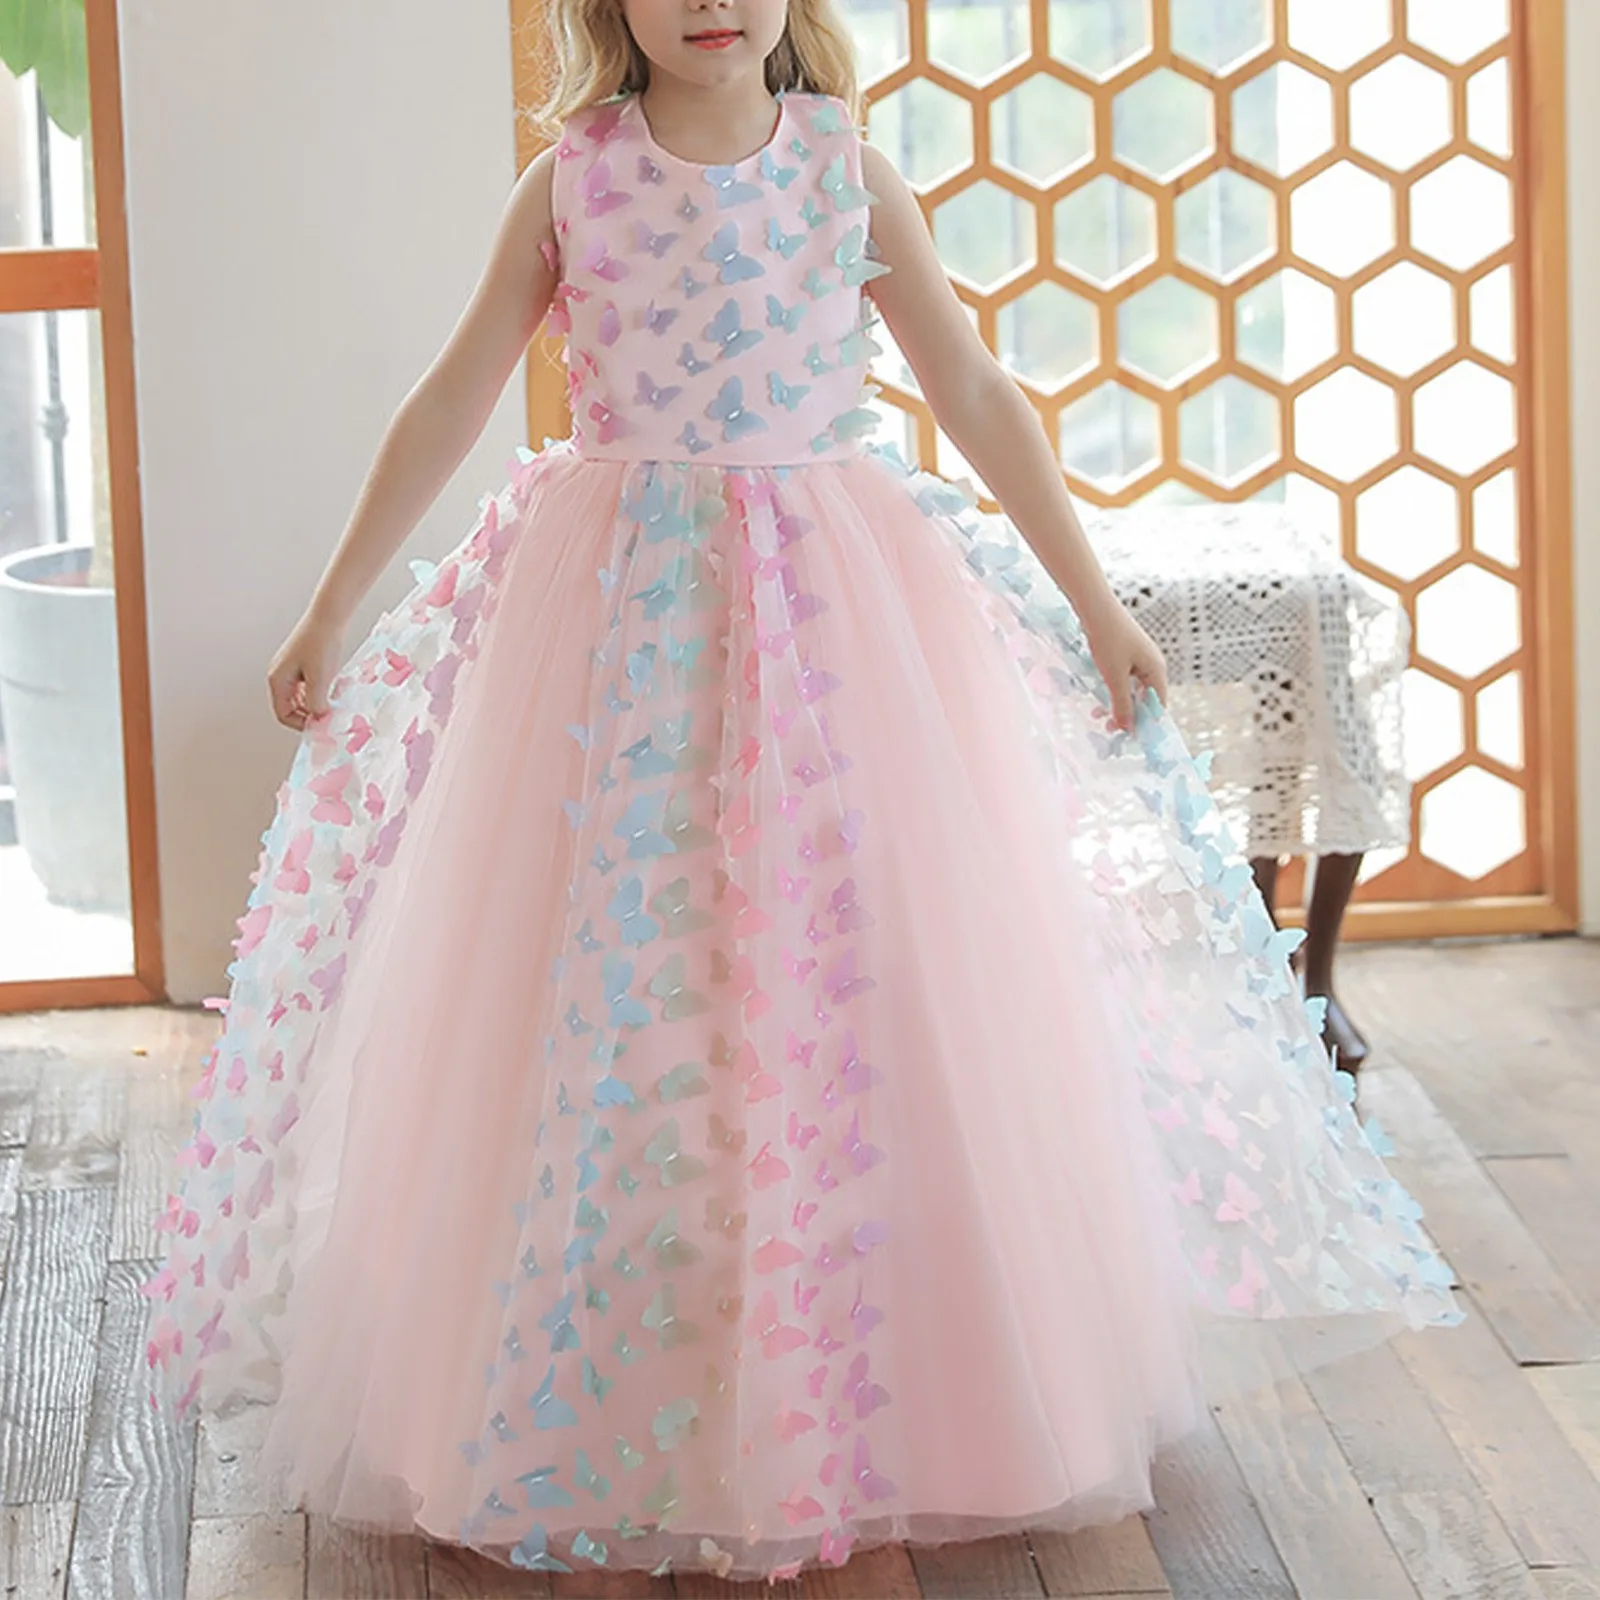 

Children'S Dress Princess Dress With Bow Solid Color Sequin Performance Cake Dress Girls Party Dresses فساتين حفلات للبنات